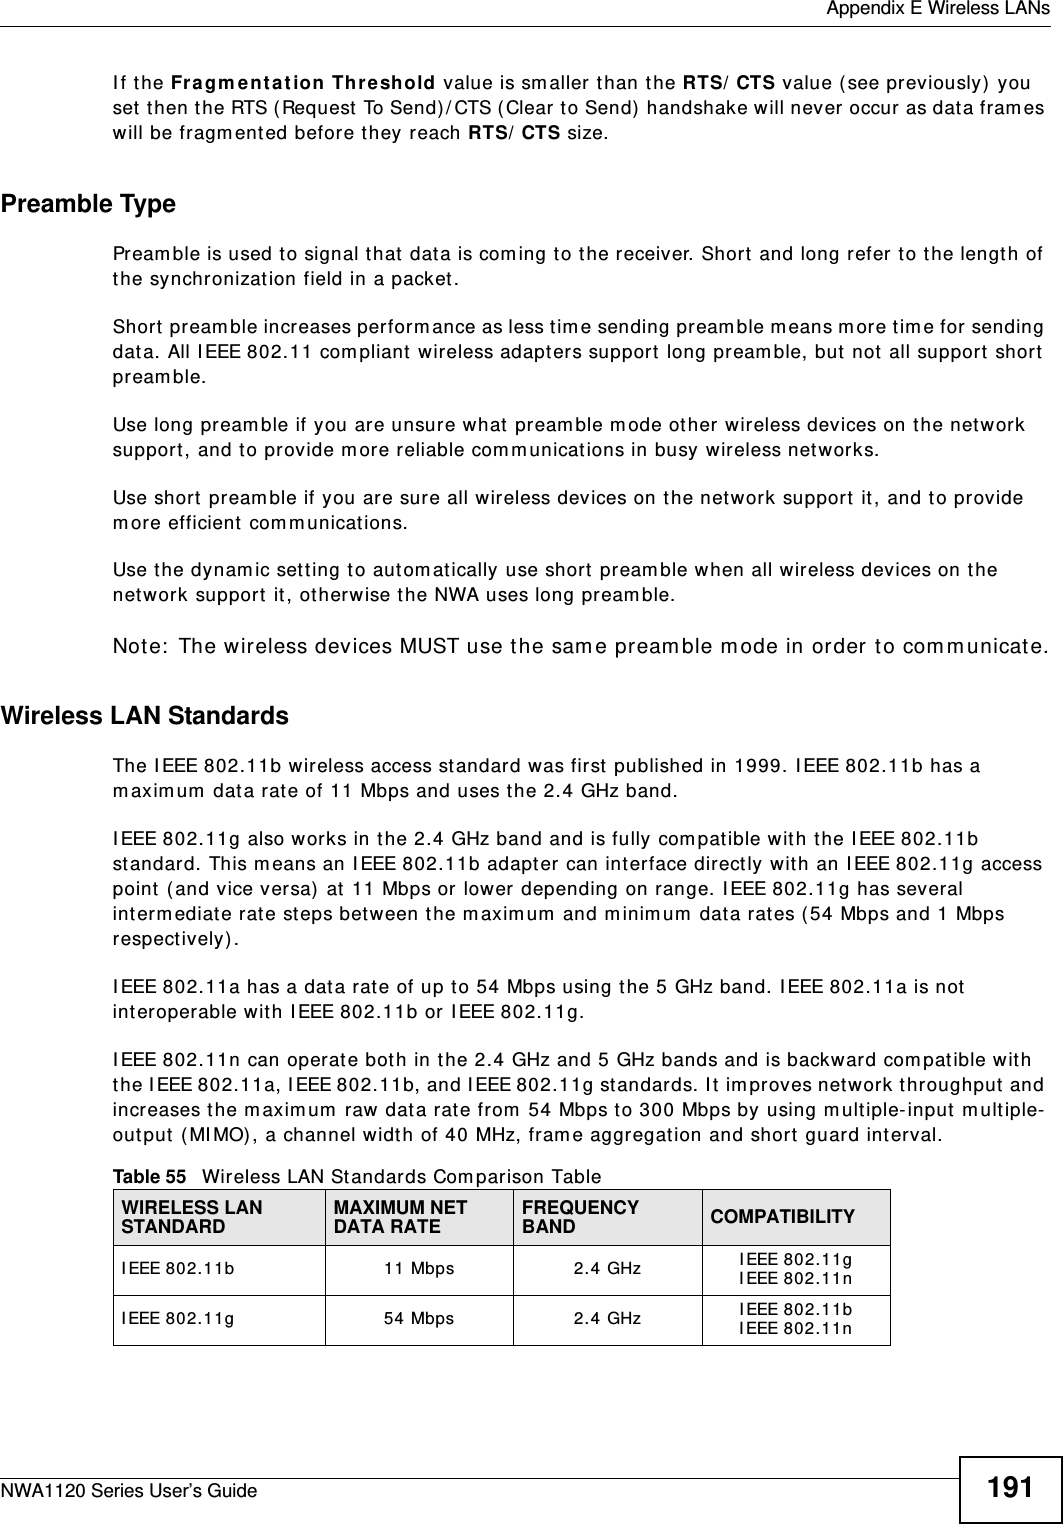  Appendix E Wireless LANsNWA1120 Series User’s Guide 191If the Fragmentation Threshold value is smaller than the RTS/CTS value (see previously) you set then the RTS (Request To Send)/CTS (Clear to Send) handshake will never occur as data frames will be fragmented before they reach RTS/CTS size.Preamble TypePreamble is used to signal that data is coming to the receiver. Short and long refer to the length of the synchronization field in a packet.Short preamble increases performance as less time sending preamble means more time for sending data. All IEEE 802.11 compliant wireless adapters support long preamble, but not all support short preamble. Use long preamble if you are unsure what preamble mode other wireless devices on the network support, and to provide more reliable communications in busy wireless networks. Use short preamble if you are sure all wireless devices on the network support it, and to provide more efficient communications.Use the dynamic setting to automatically use short preamble when all wireless devices on the network support it, otherwise the NWA uses long preamble.Note: The wireless devices MUST use the same preamble mode in order to communicate.Wireless LAN StandardsThe IEEE 802.11b wireless access standard was first published in 1999. IEEE 802.11b has a maximum data rate of 11 Mbps and uses the 2.4 GHz band.IEEE 802.11g also works in the 2.4 GHz band and is fully compatible with the IEEE 802.11b standard. This means an IEEE 802.11b adapter can interface directly with an IEEE 802.11g access point (and vice versa) at 11 Mbps or lower depending on range. IEEE 802.11g has several intermediate rate steps between the maximum and minimum data rates (54 Mbps and 1 Mbps respectively).IEEE 802.11a has a data rate of up to 54 Mbps using the 5 GHz band. IEEE 802.11a is not interoperable with IEEE 802.11b or IEEE 802.11g.IEEE 802.11n can operate both in the 2.4 GHz and 5 GHz bands and is backward compatible with the IEEE 802.11a, IEEE 802.11b, and IEEE 802.11g standards. It improves network throughput and increases the maximum raw data rate from 54 Mbps to 300 Mbps by using multiple-input multiple-output (MIMO), a channel width of 40 MHz, frame aggregation and short guard interval.Table 55   Wireless LAN Standards Comparison TableWIRELESS LAN STANDARD MAXIMUM NET DATA RATE FREQUENCY BAND COMPATIBILITYIEEE 802.11b 11 Mbps 2.4 GHz IEEE 802.11gIEEE 802.11nIEEE 802.11g 54 Mbps 2.4 GHz IEEE 802.11bIEEE 802.11n